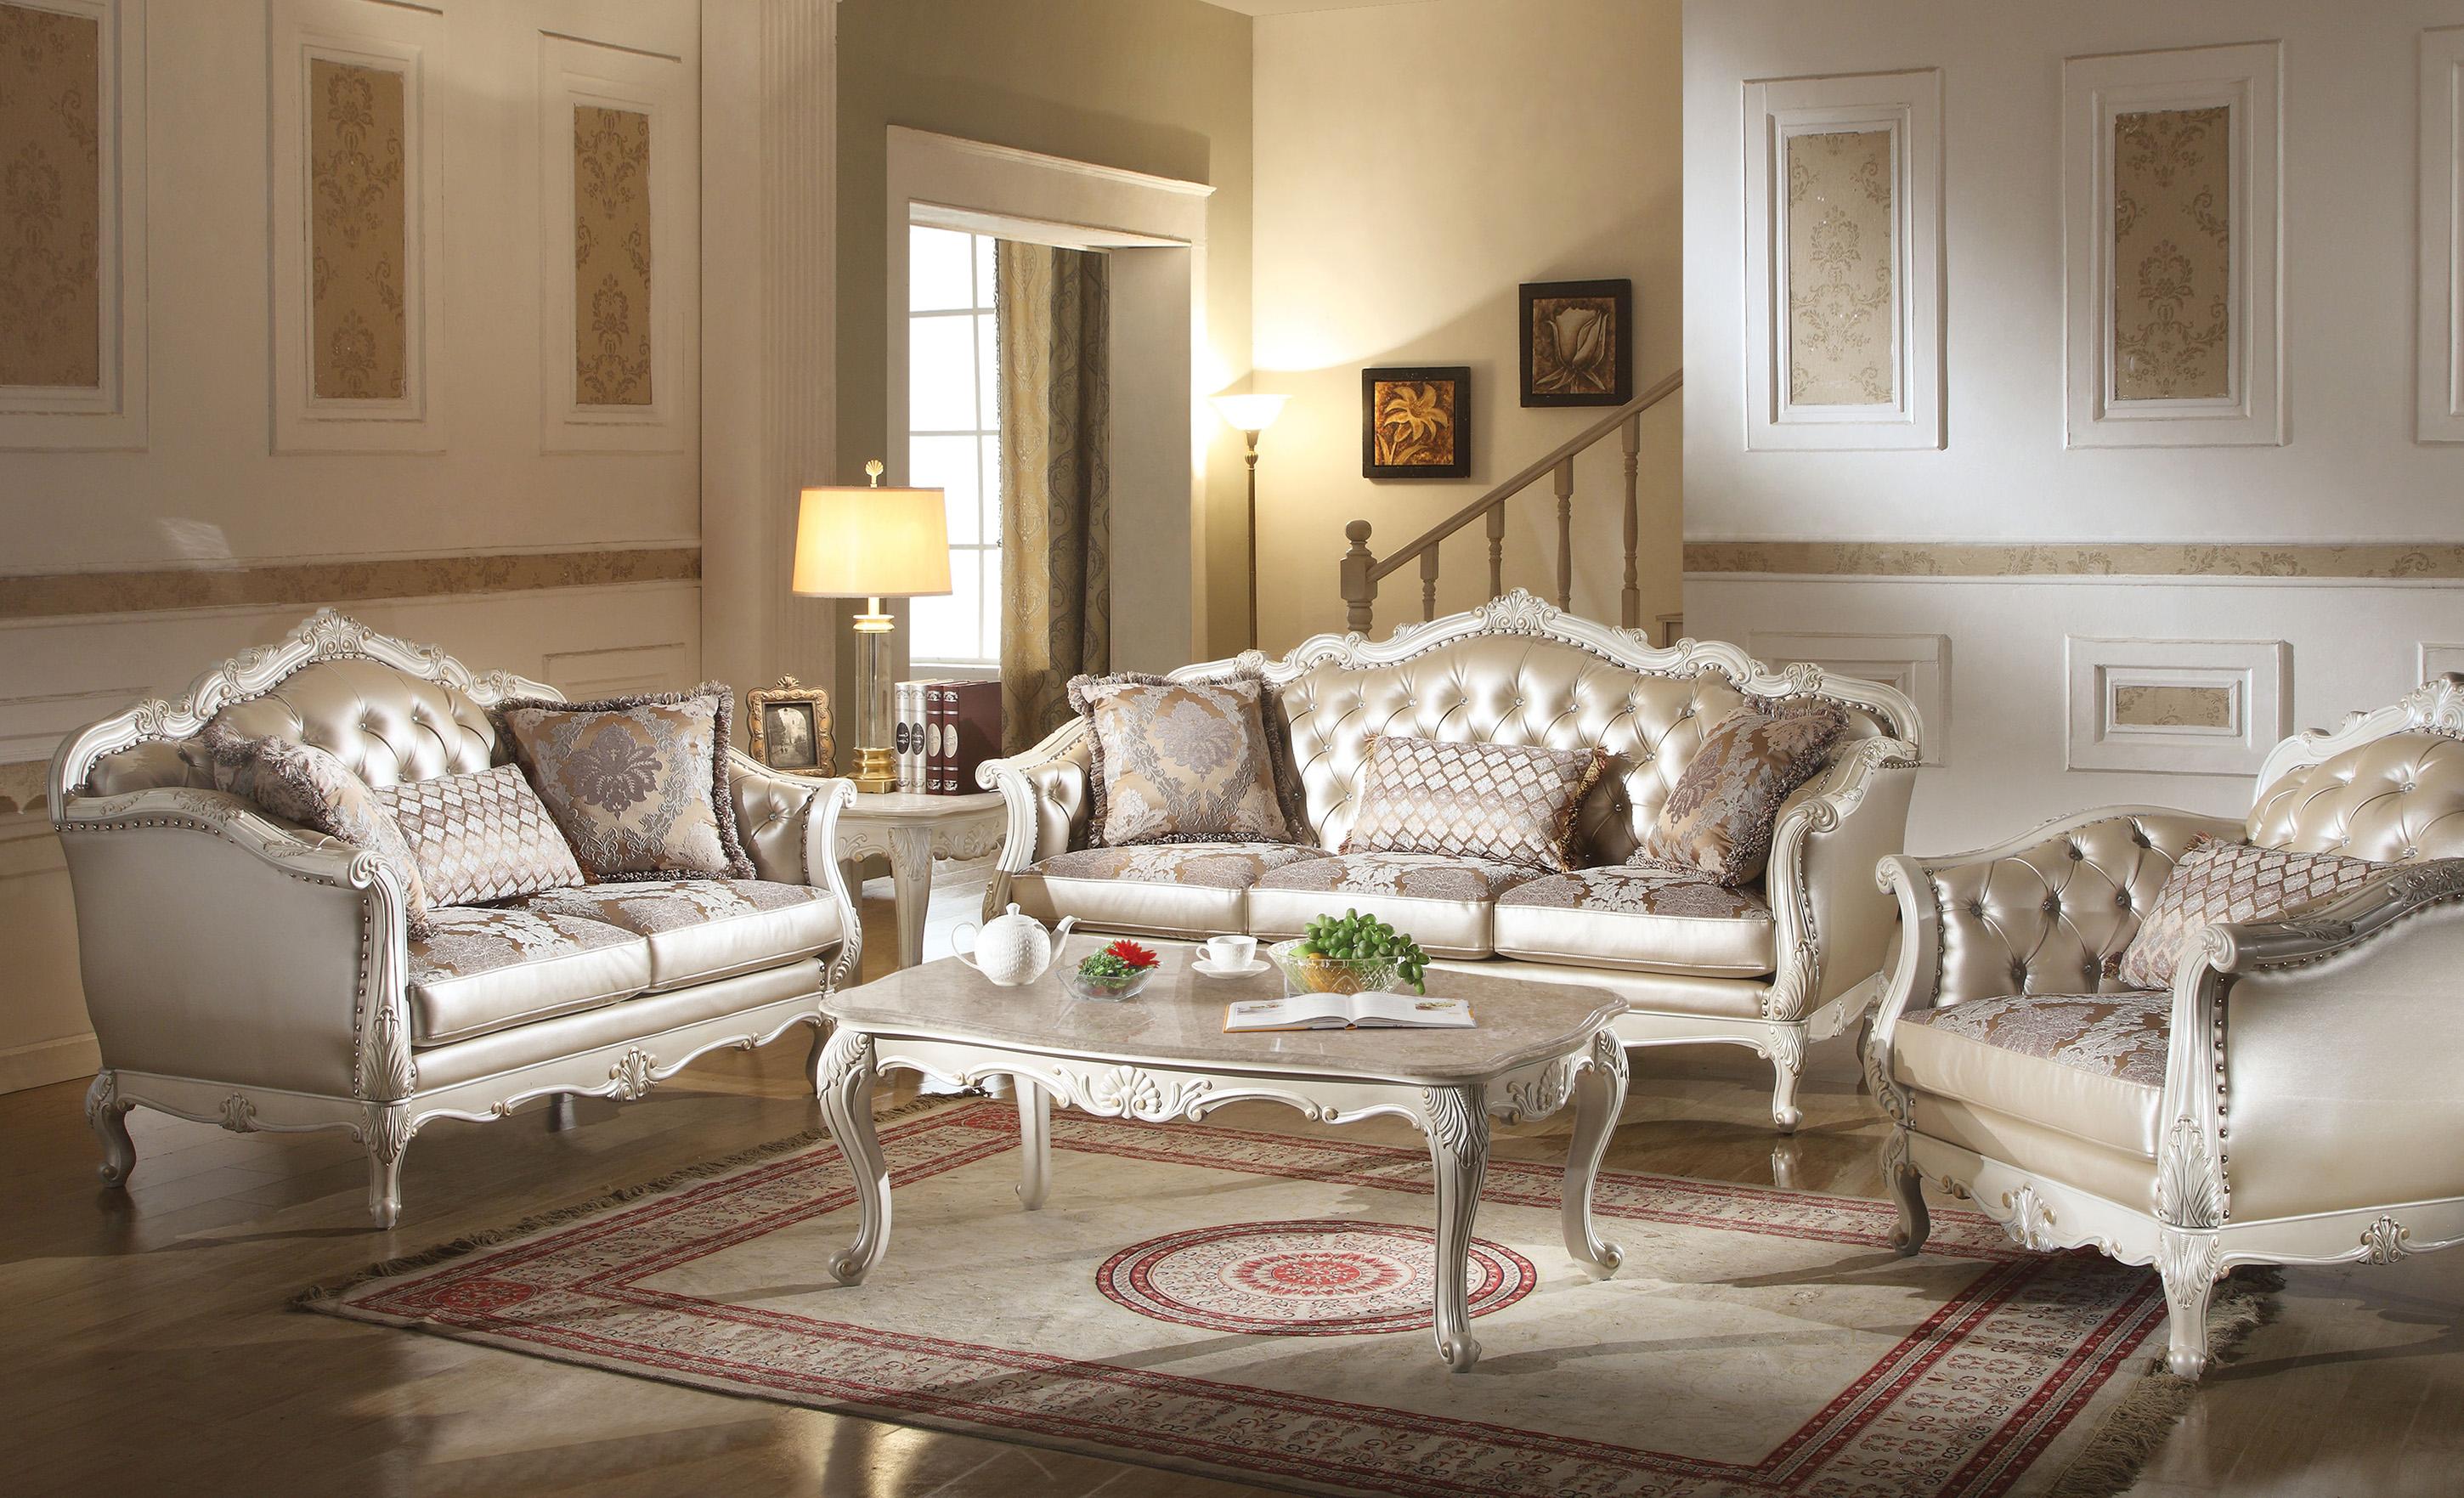 

    
Rose Gold and Pearl White Living Room Set 5Pcs Acme Furniture 53540 Chantelle
